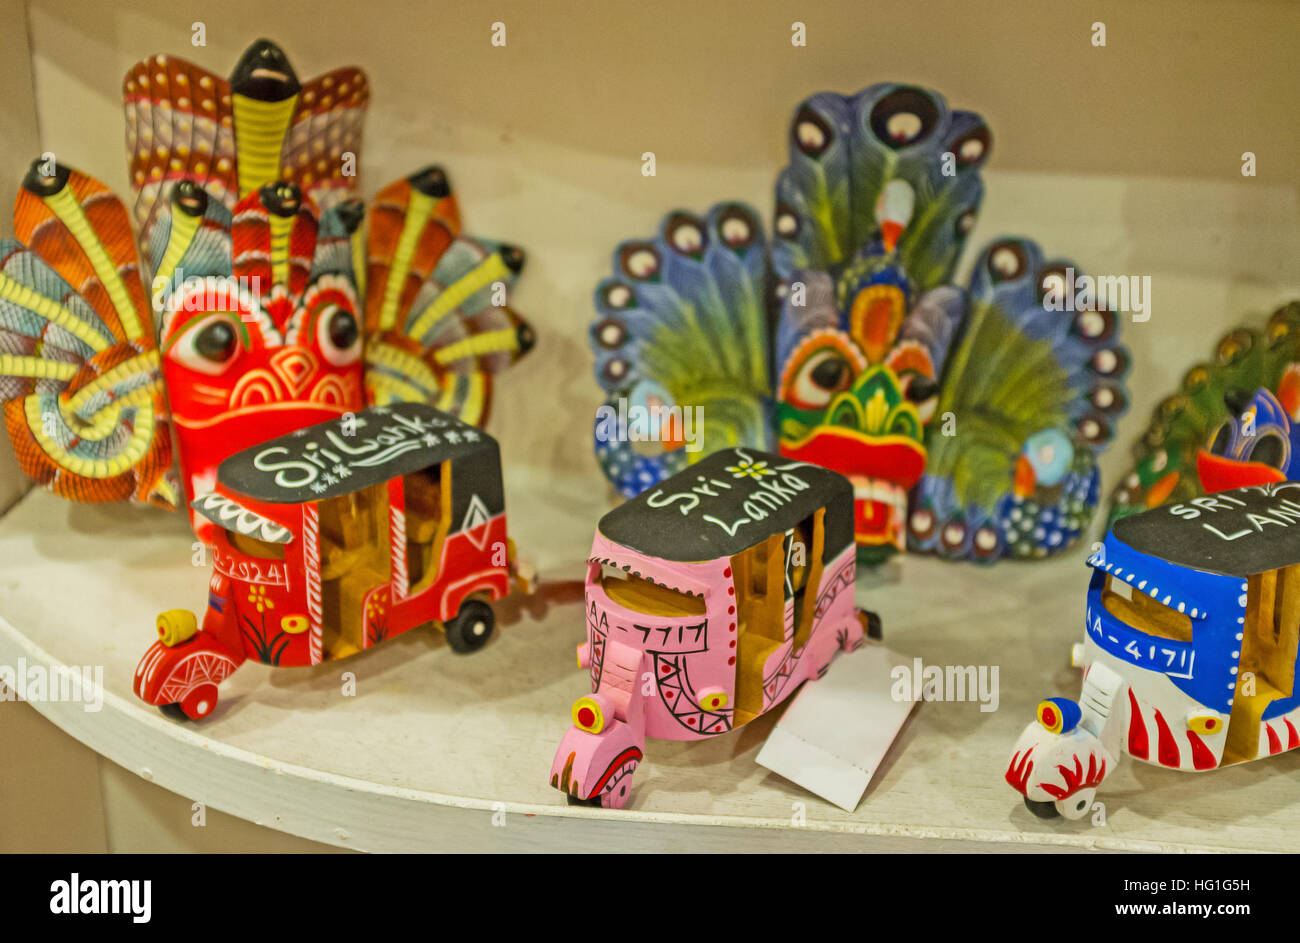 The small wooden tuk tuks among masks and other souvenirs in tourist store Stock Photo